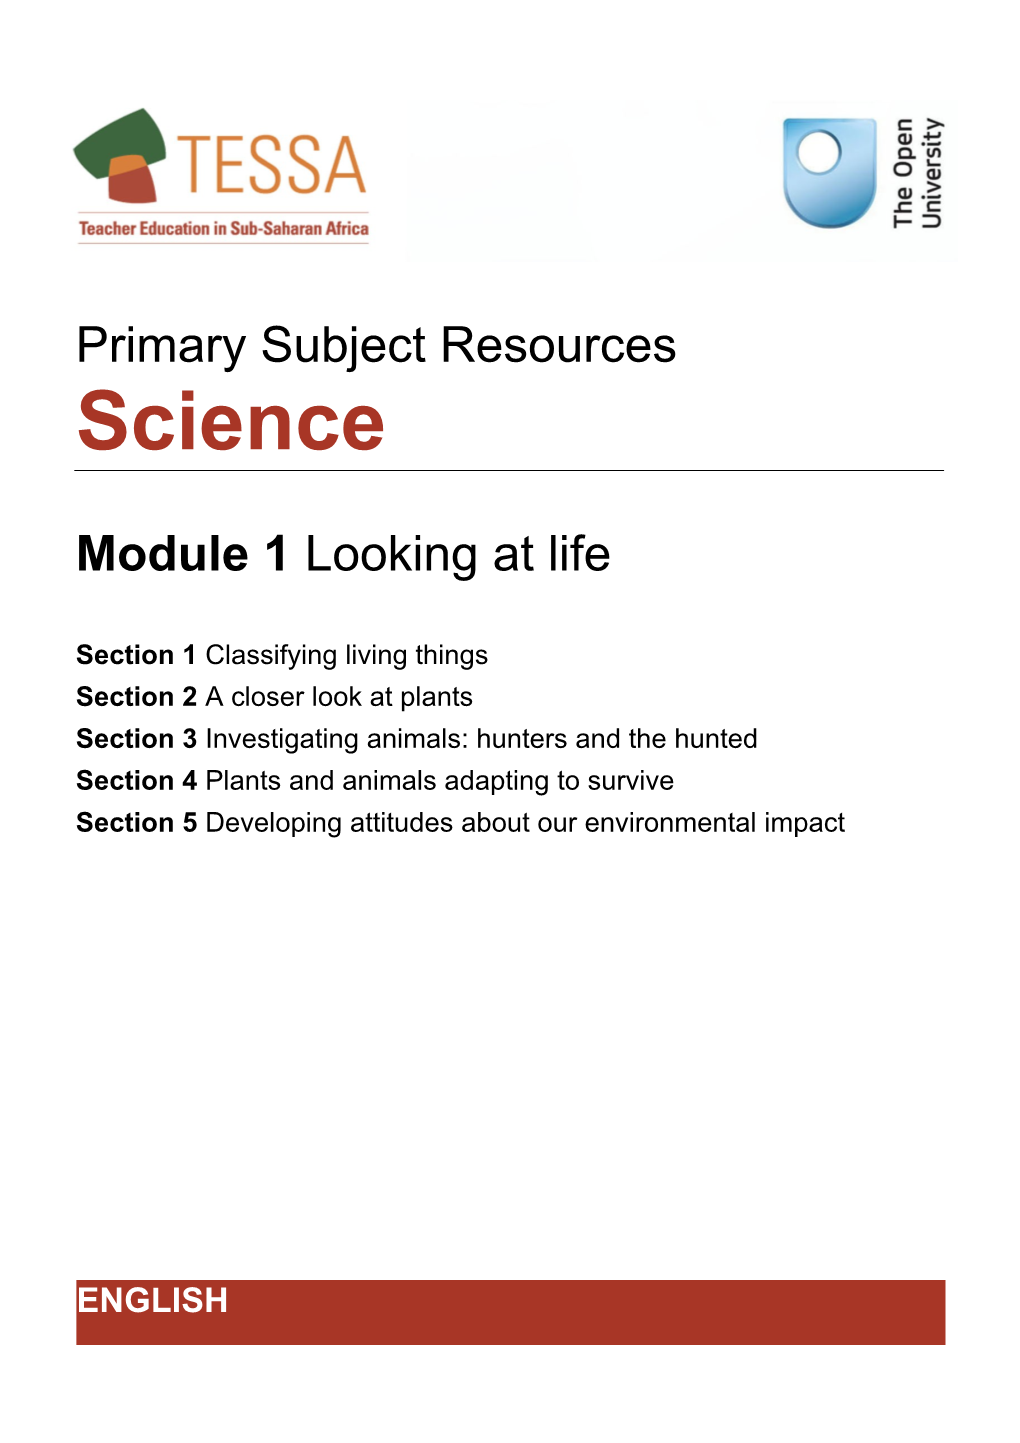 Module 1: Science - Looking at Life